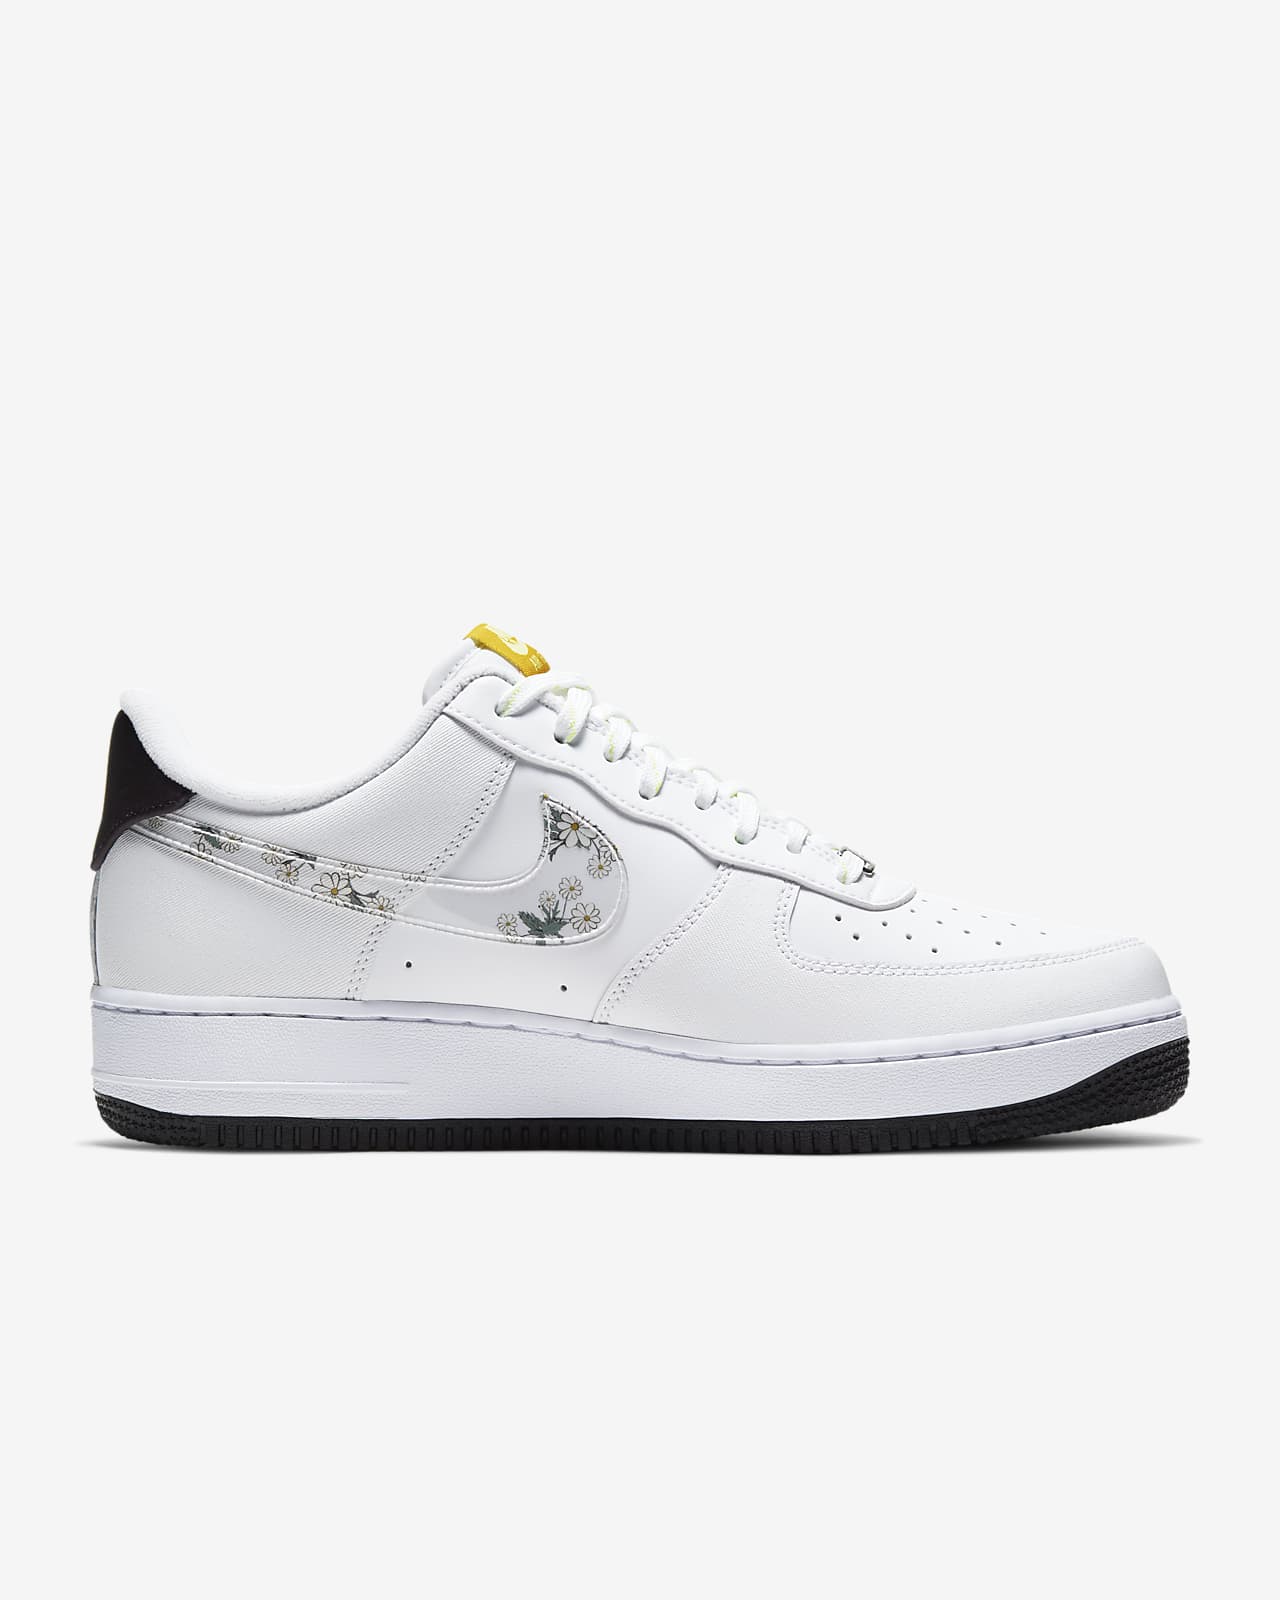 nike air force one lv8 shoes